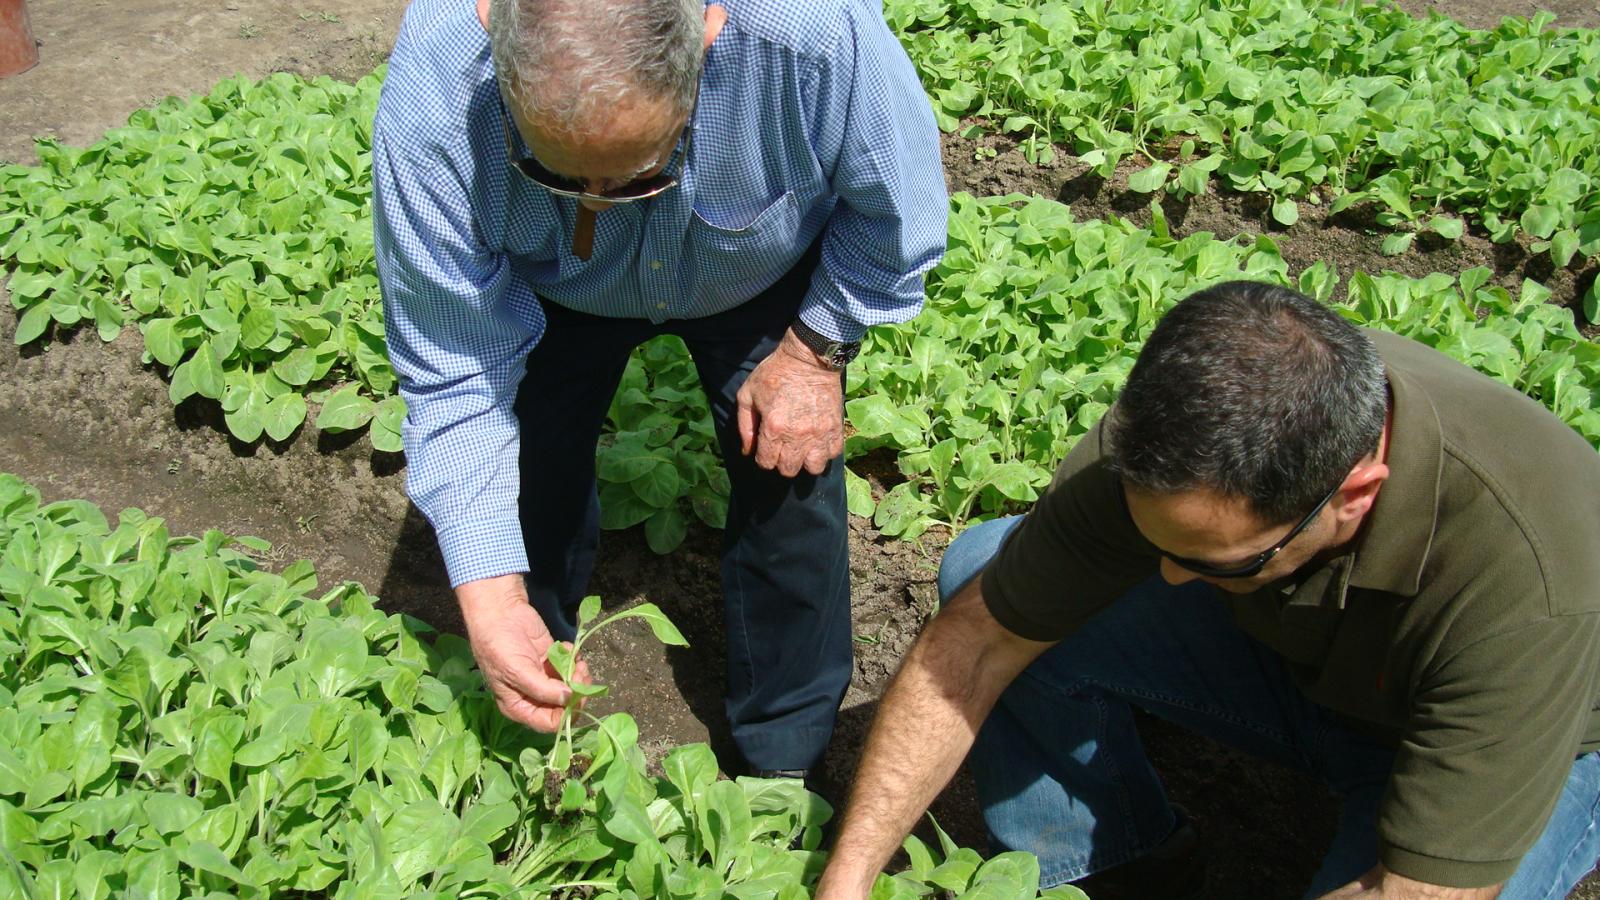 Don Orlando and Jorge inspecting thier seedlings